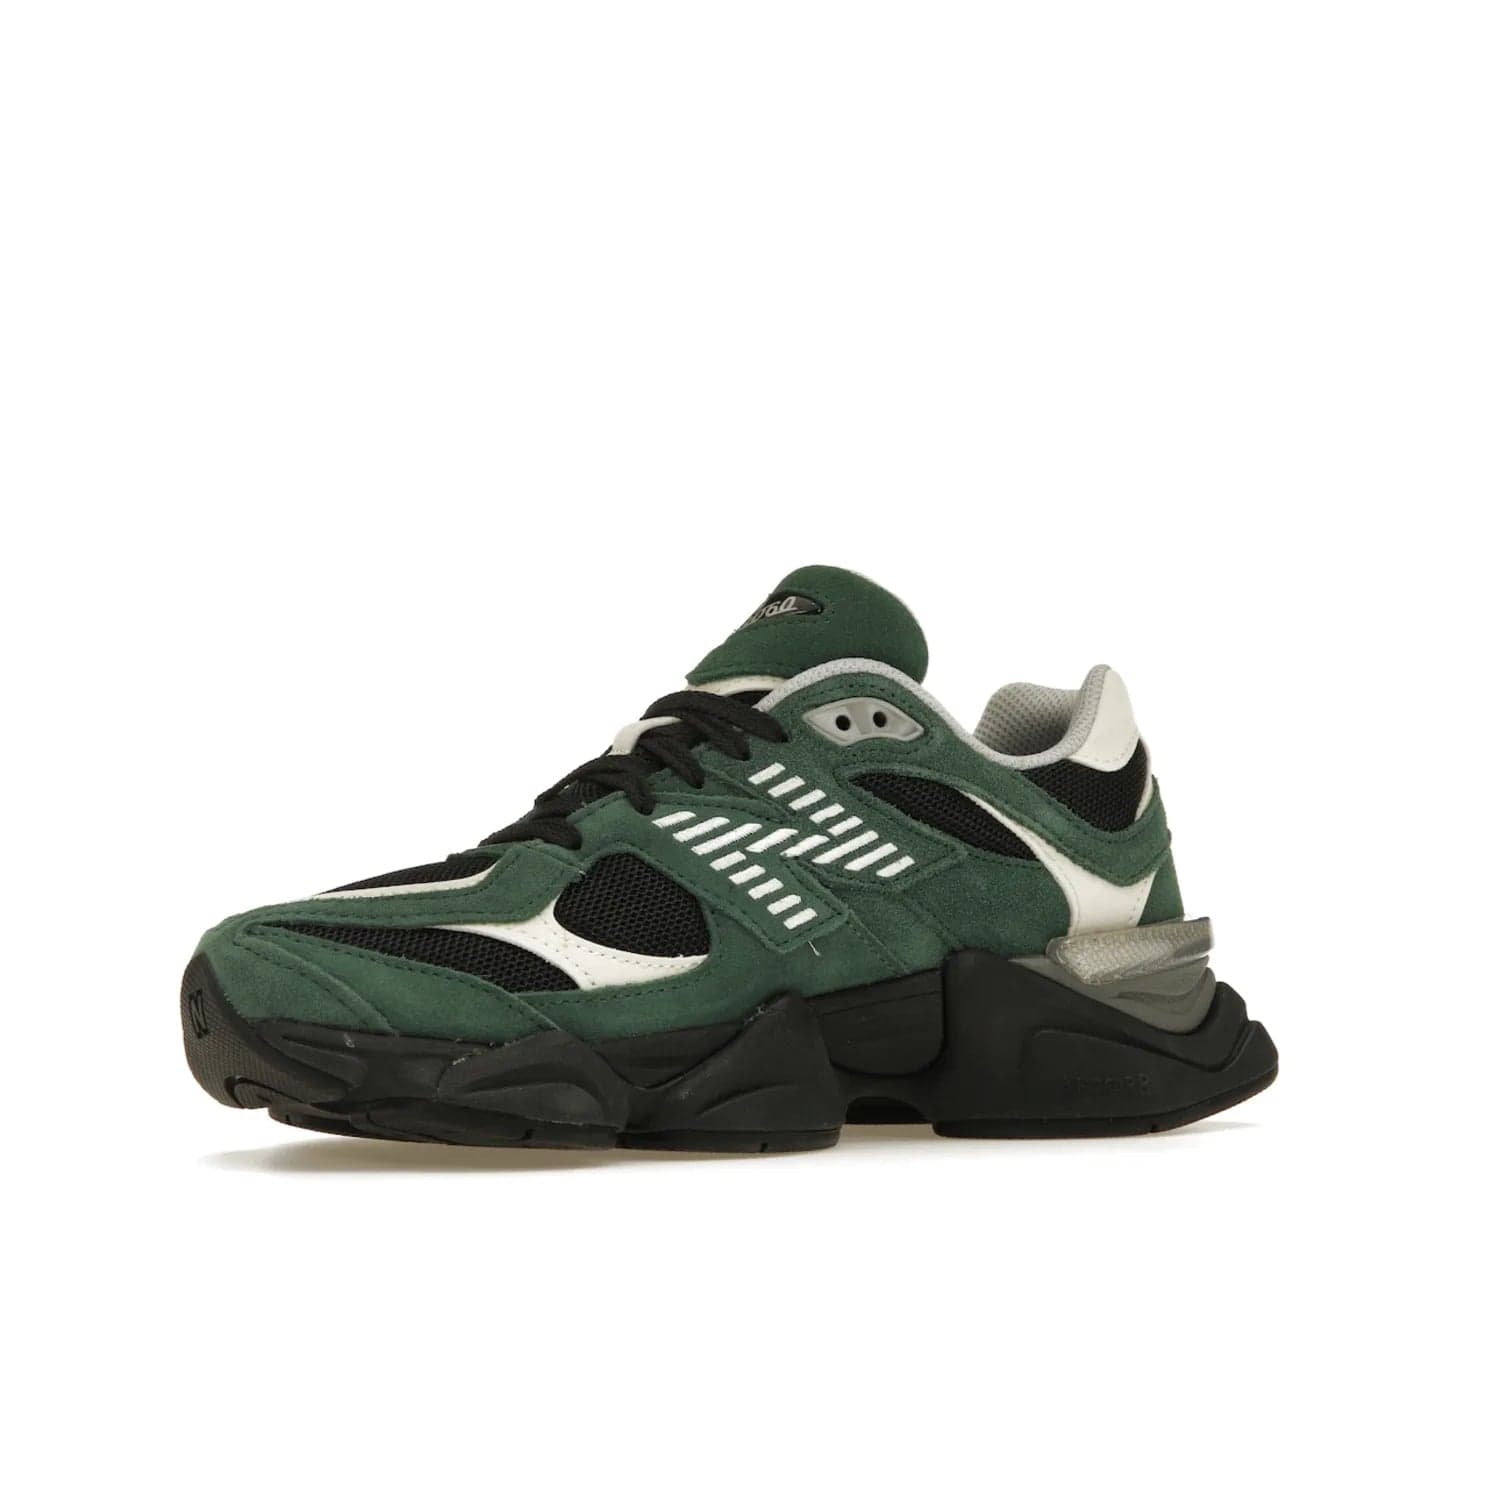 New Balance 9060 Team Forest Green - Image 16 - Only at www.BallersClubKickz.com - Introducing the New Balance 9060 Team Forest Green! Durable statement sneaker with a vibrant forest green upper and contrast detailing. Release date 2023-04-04 - don't miss out!